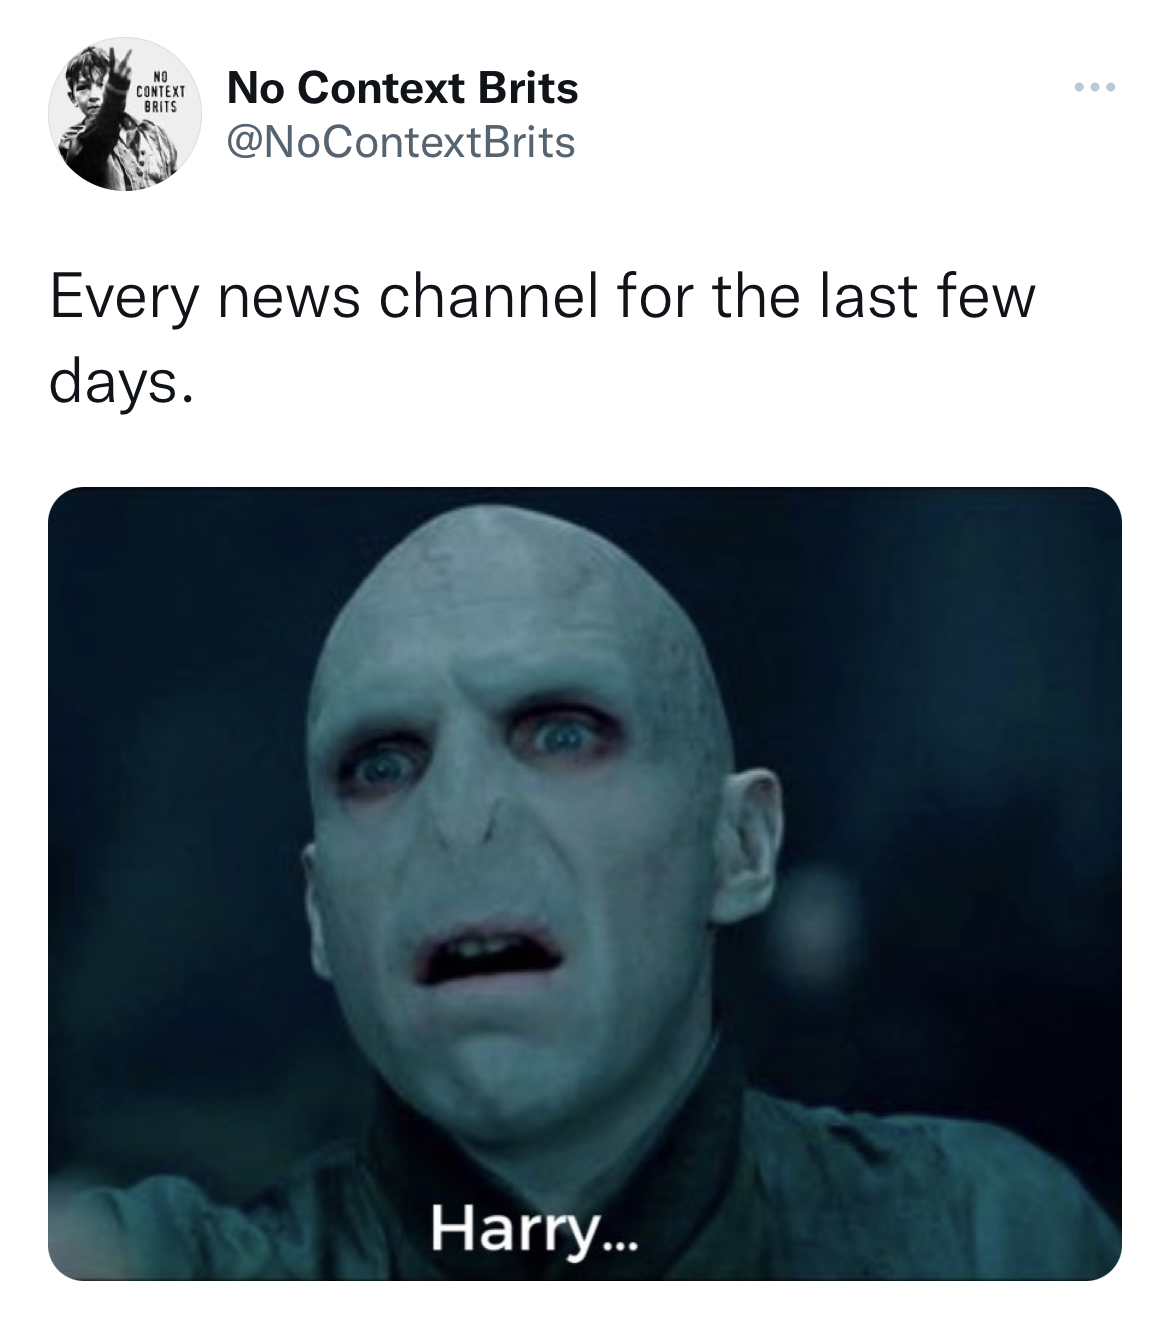 Tweets dunking on celebs - Cont Ets No Context Brits Every news channel for the last few days. Harry...